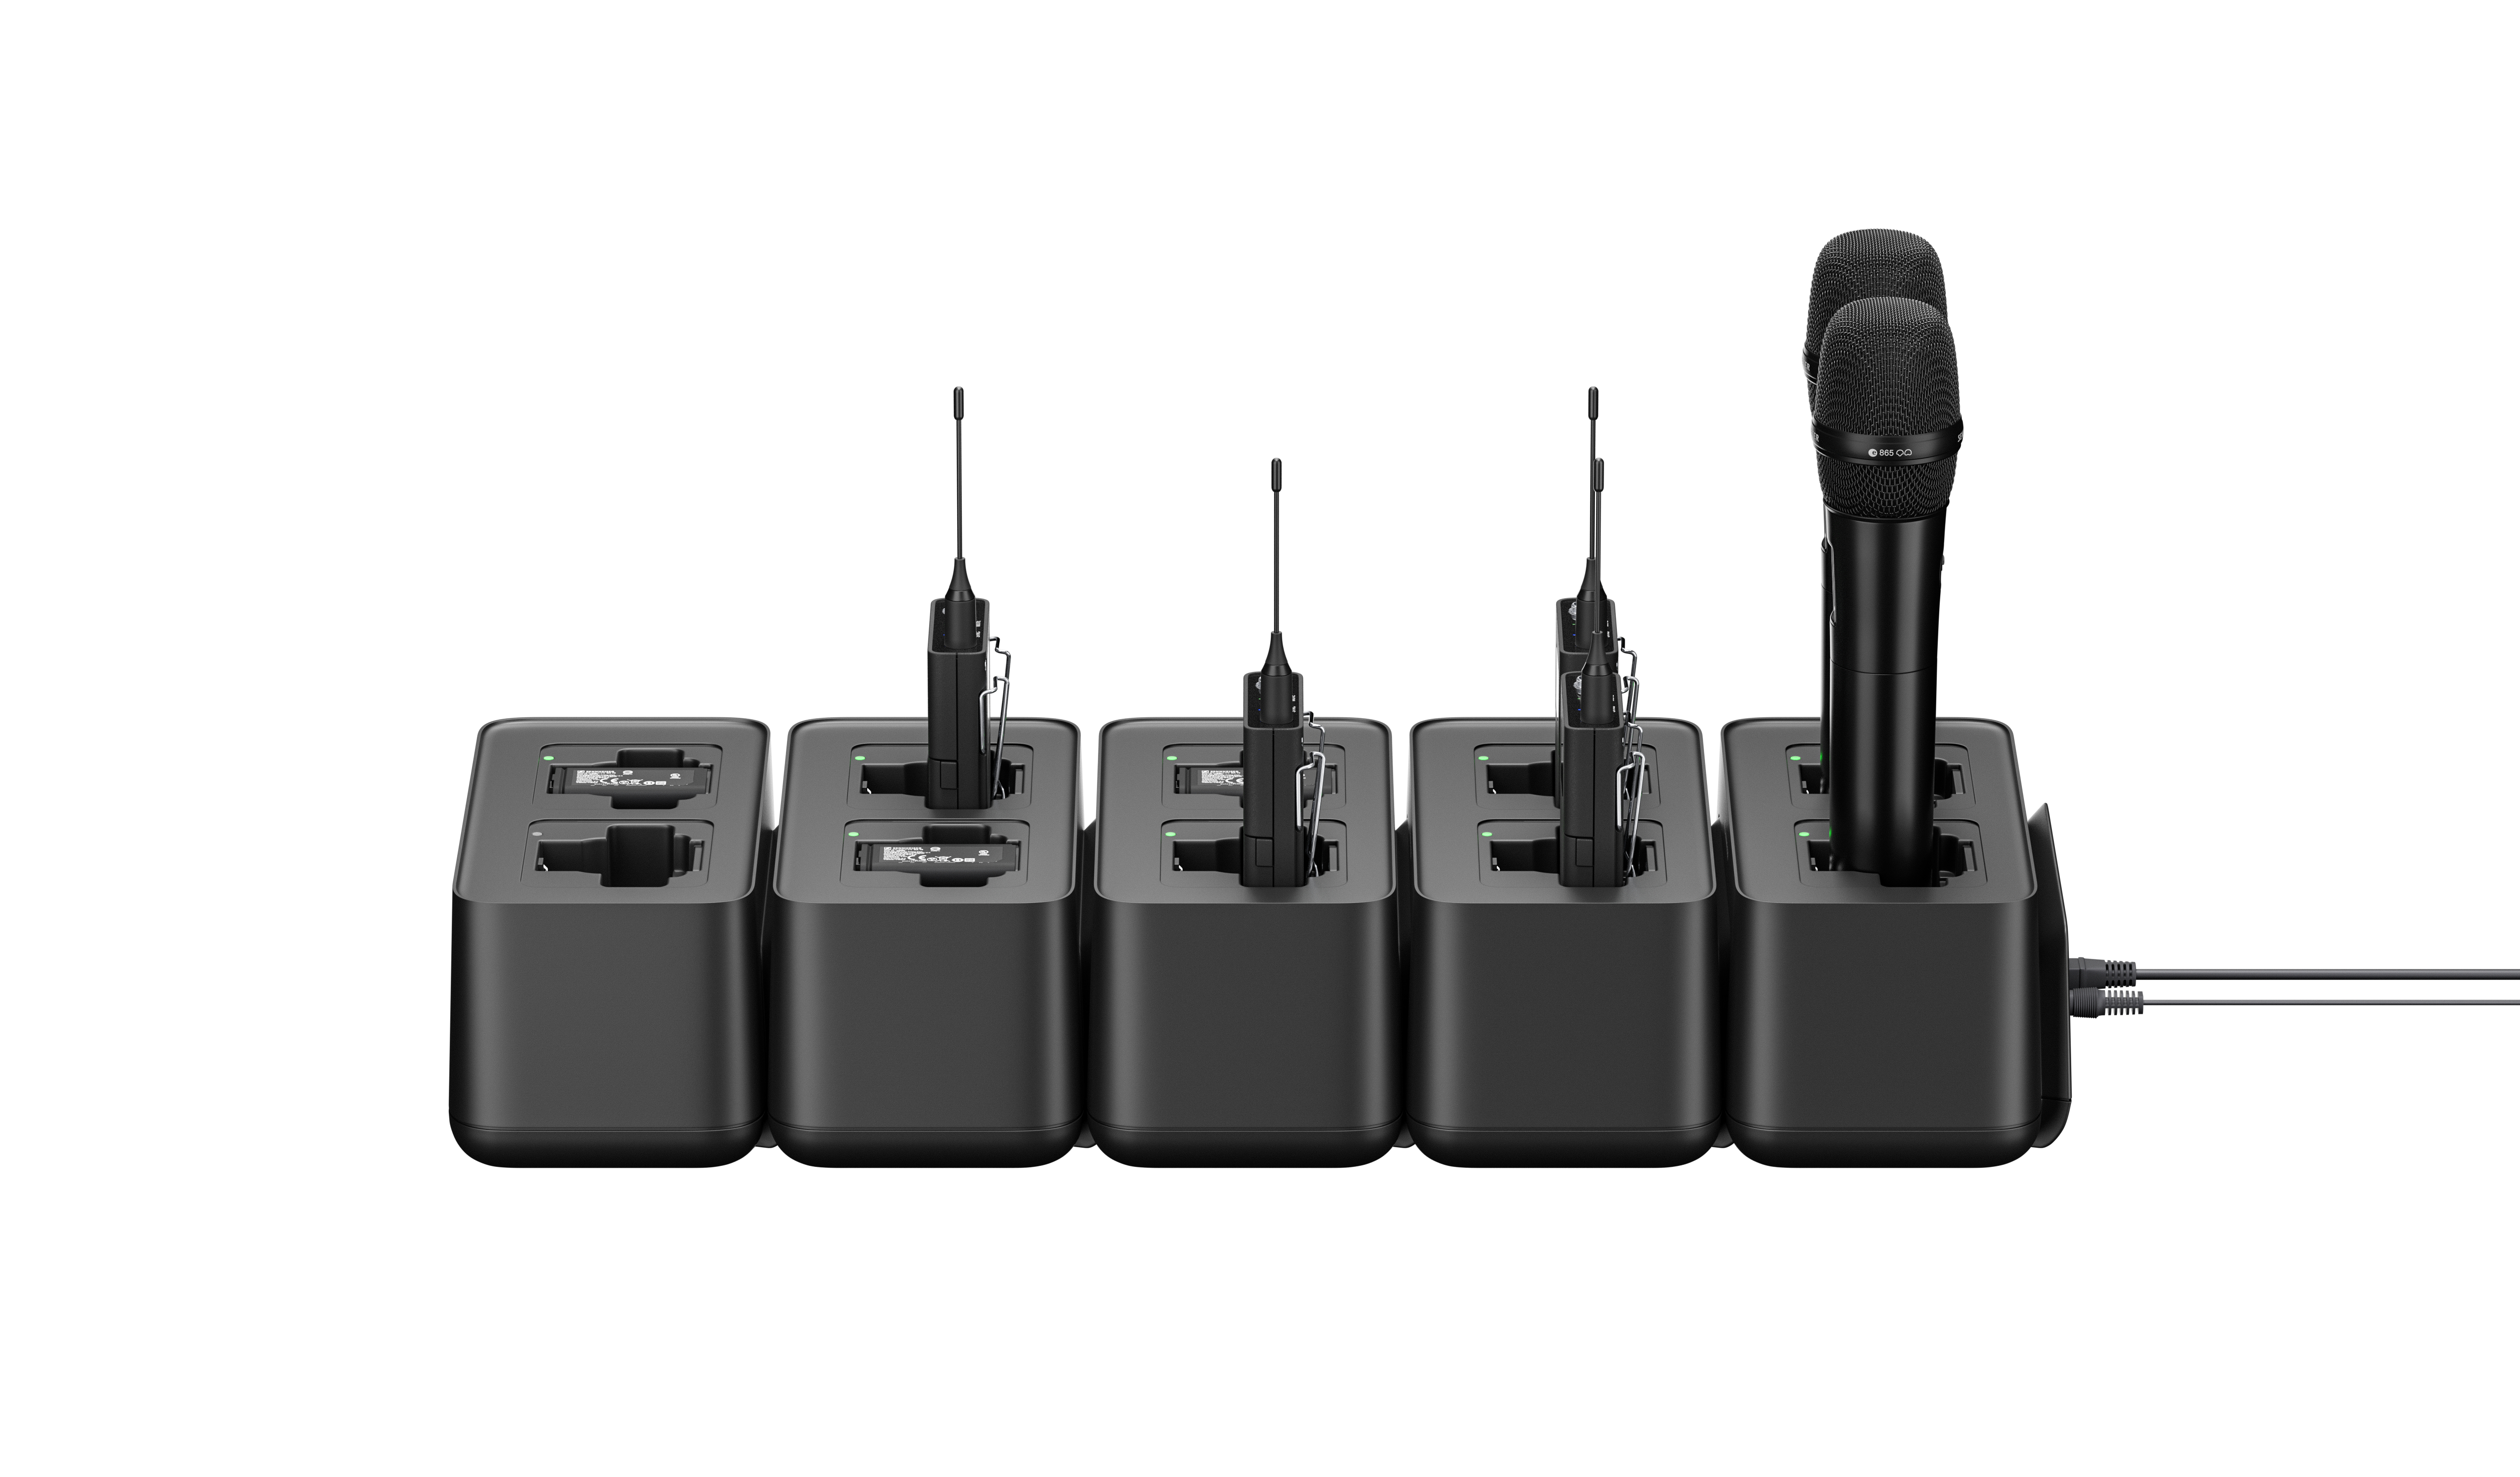 The new CHG 70N-C cascading network charge